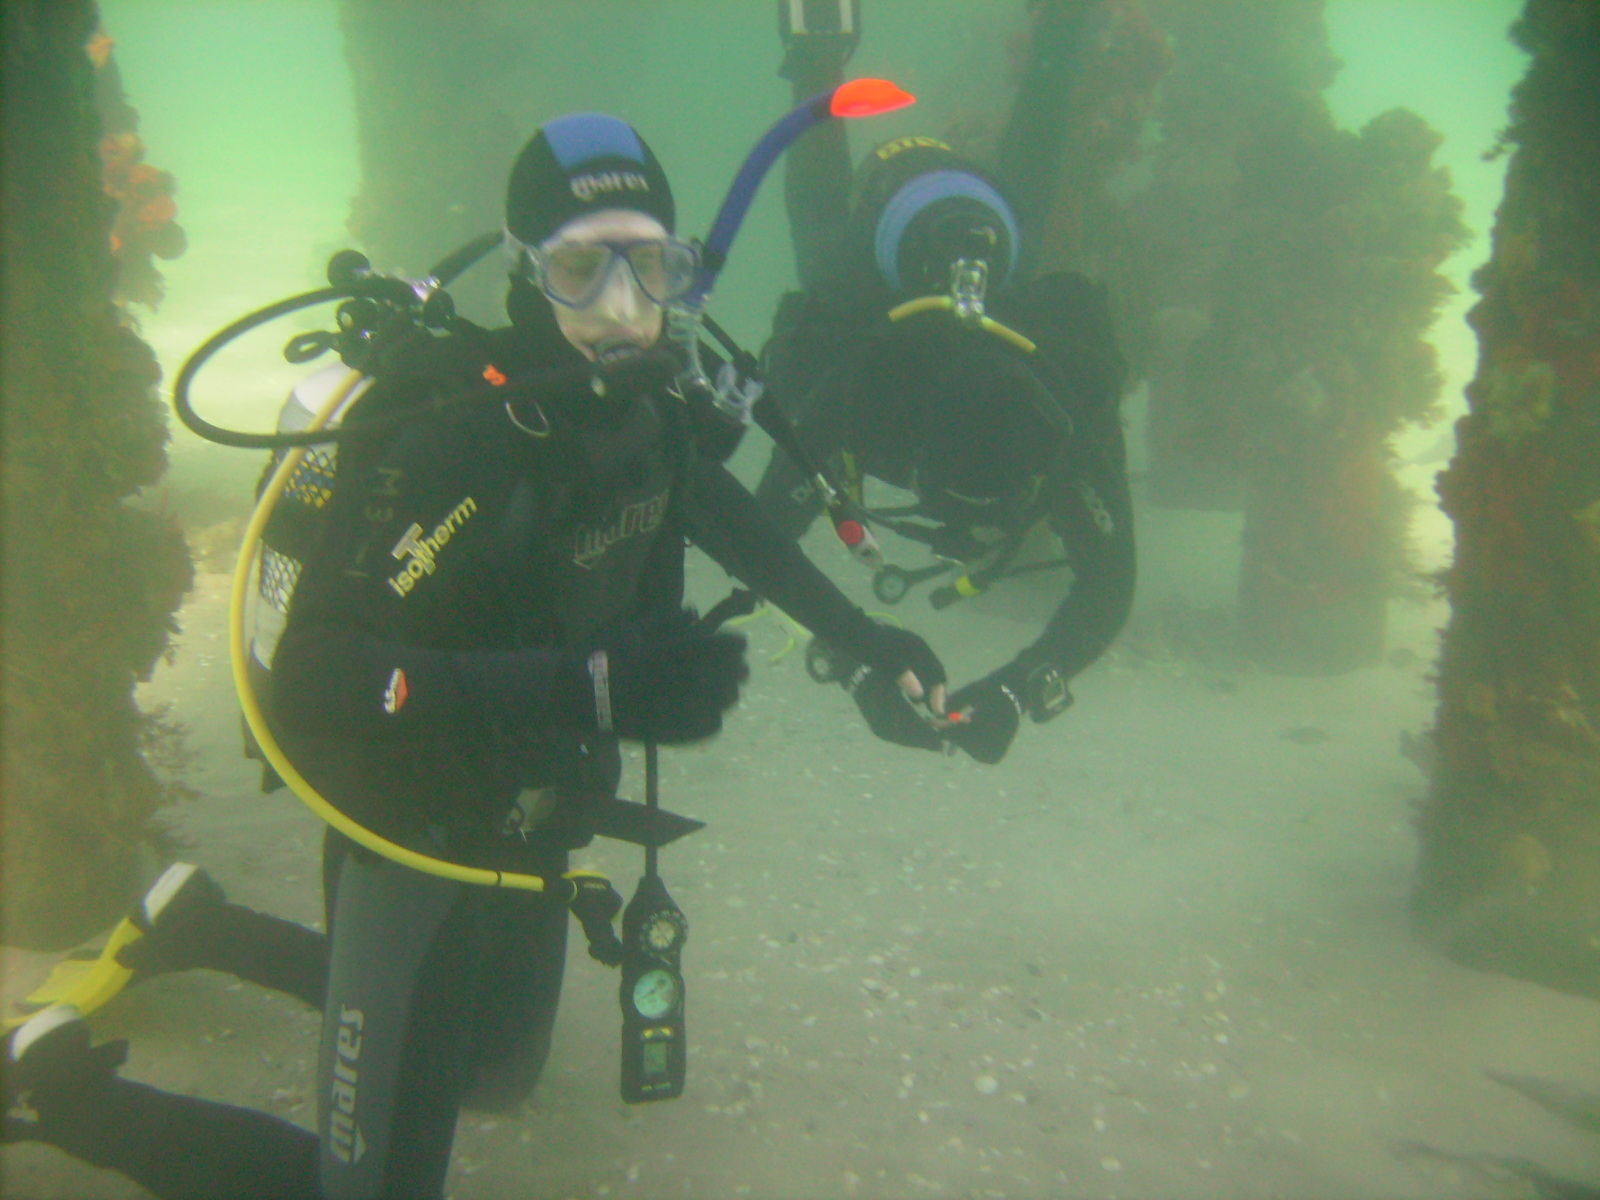 Open water dives on my open water course